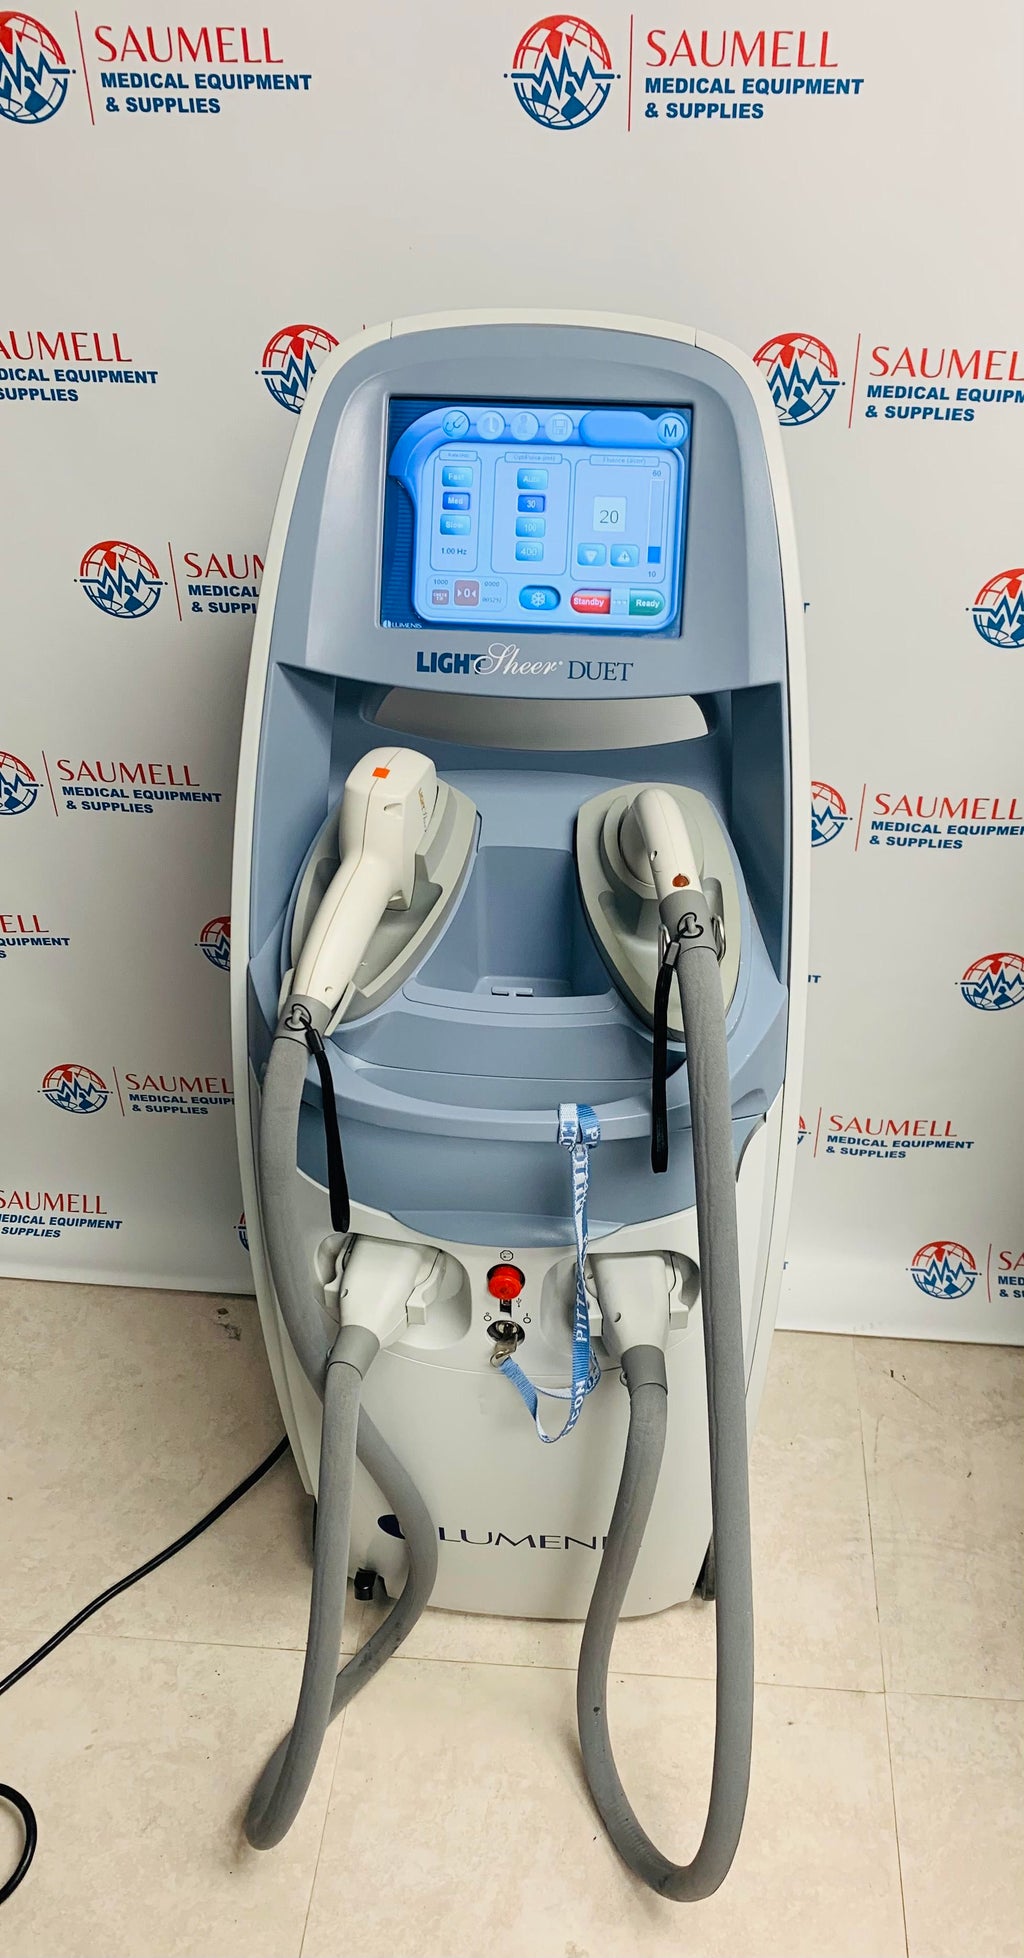 Preowned Syneron Elos Plus Laser – Saumell Medical Supplies